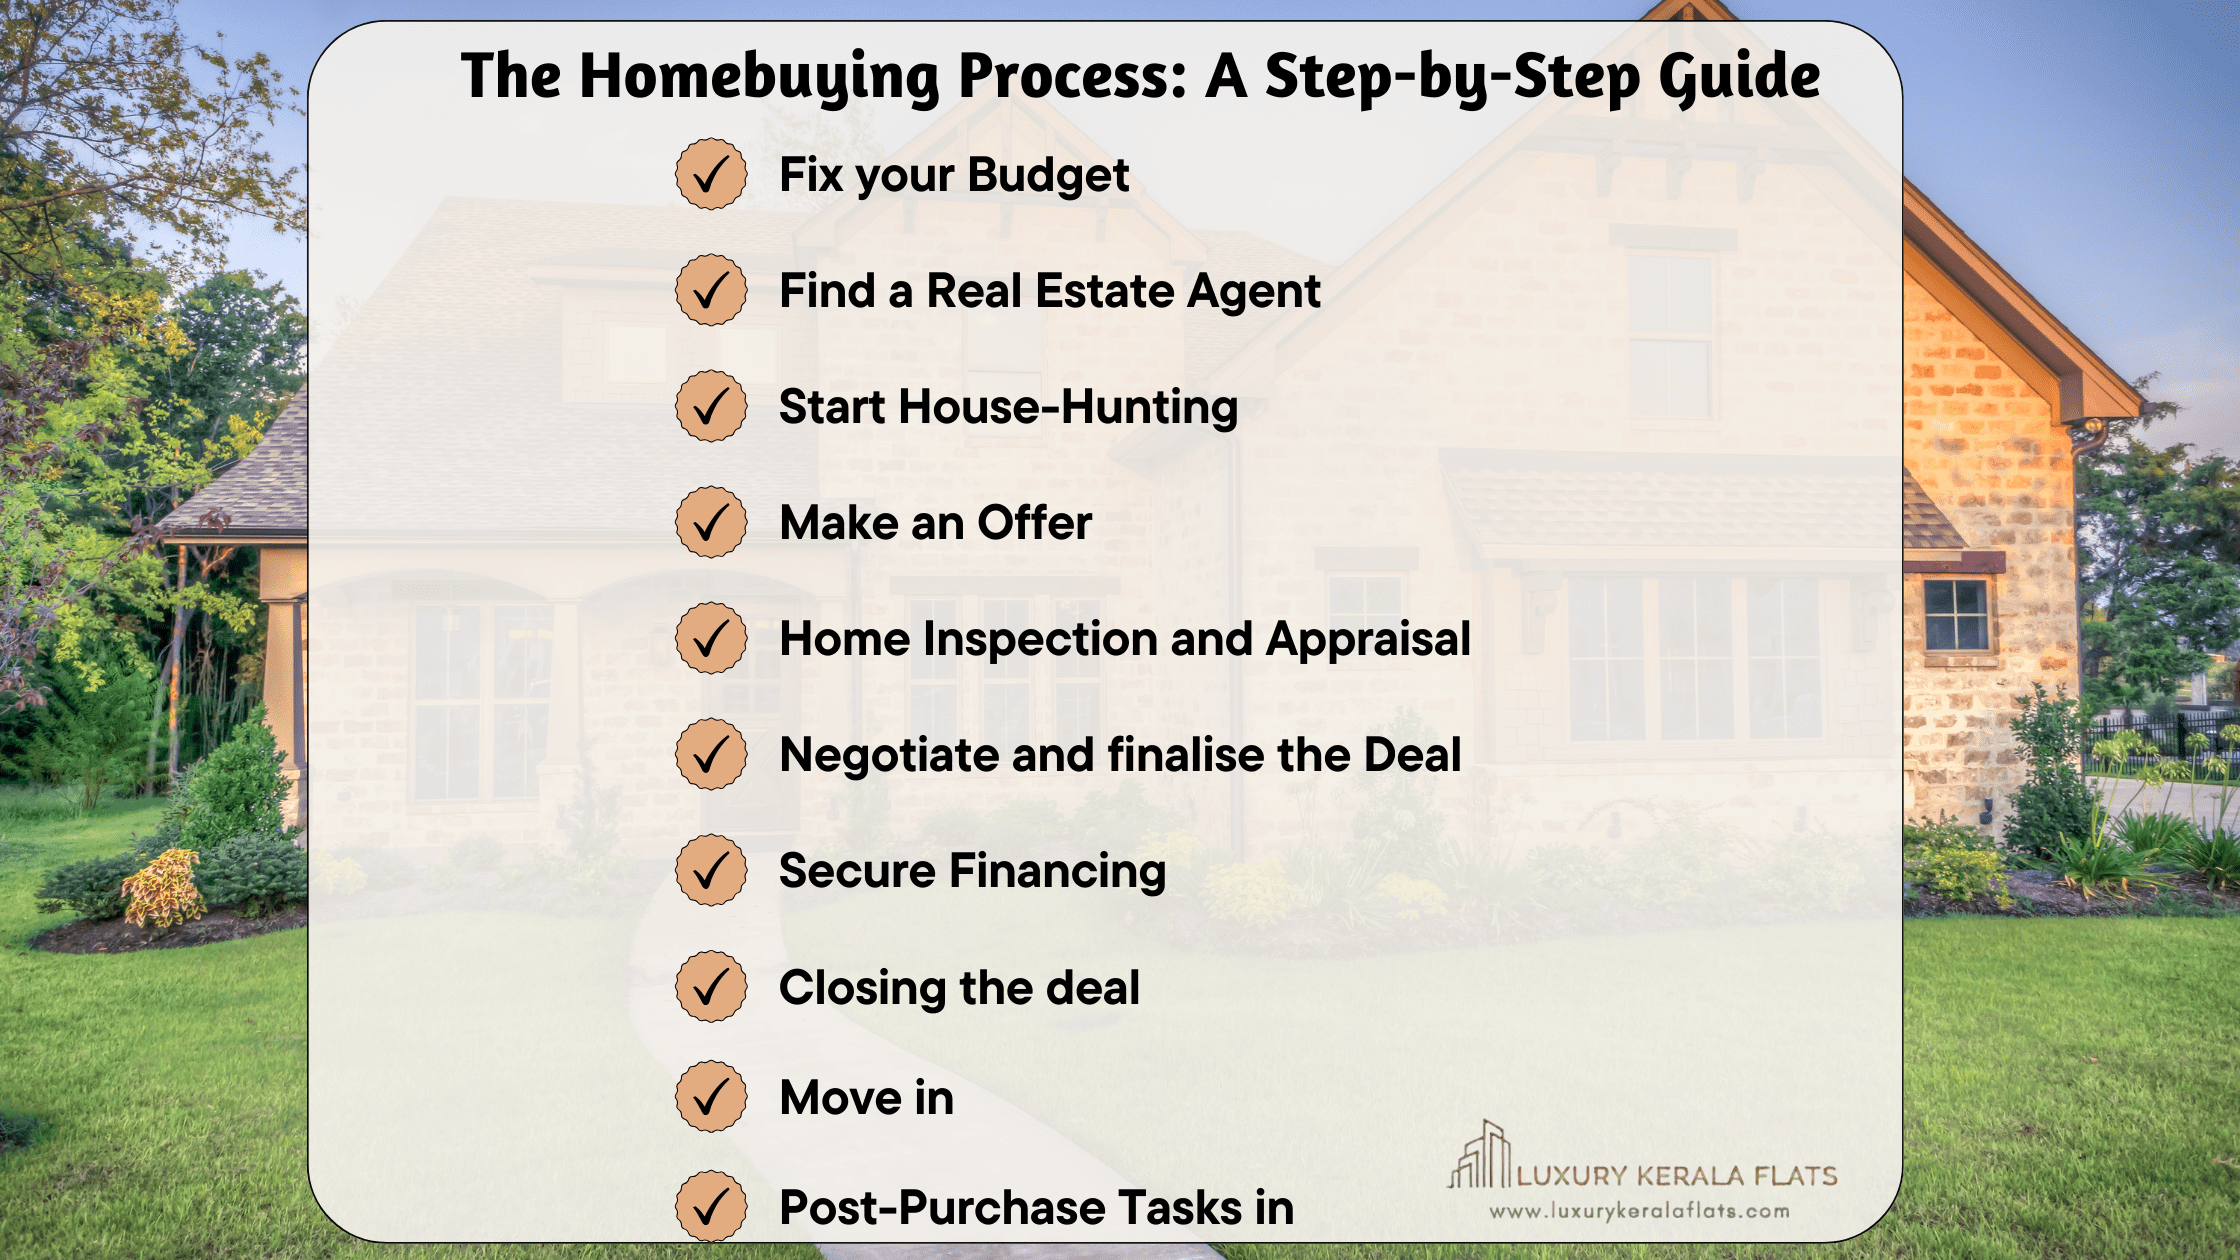 The Homebuying Process: A Step-by-Step Guide